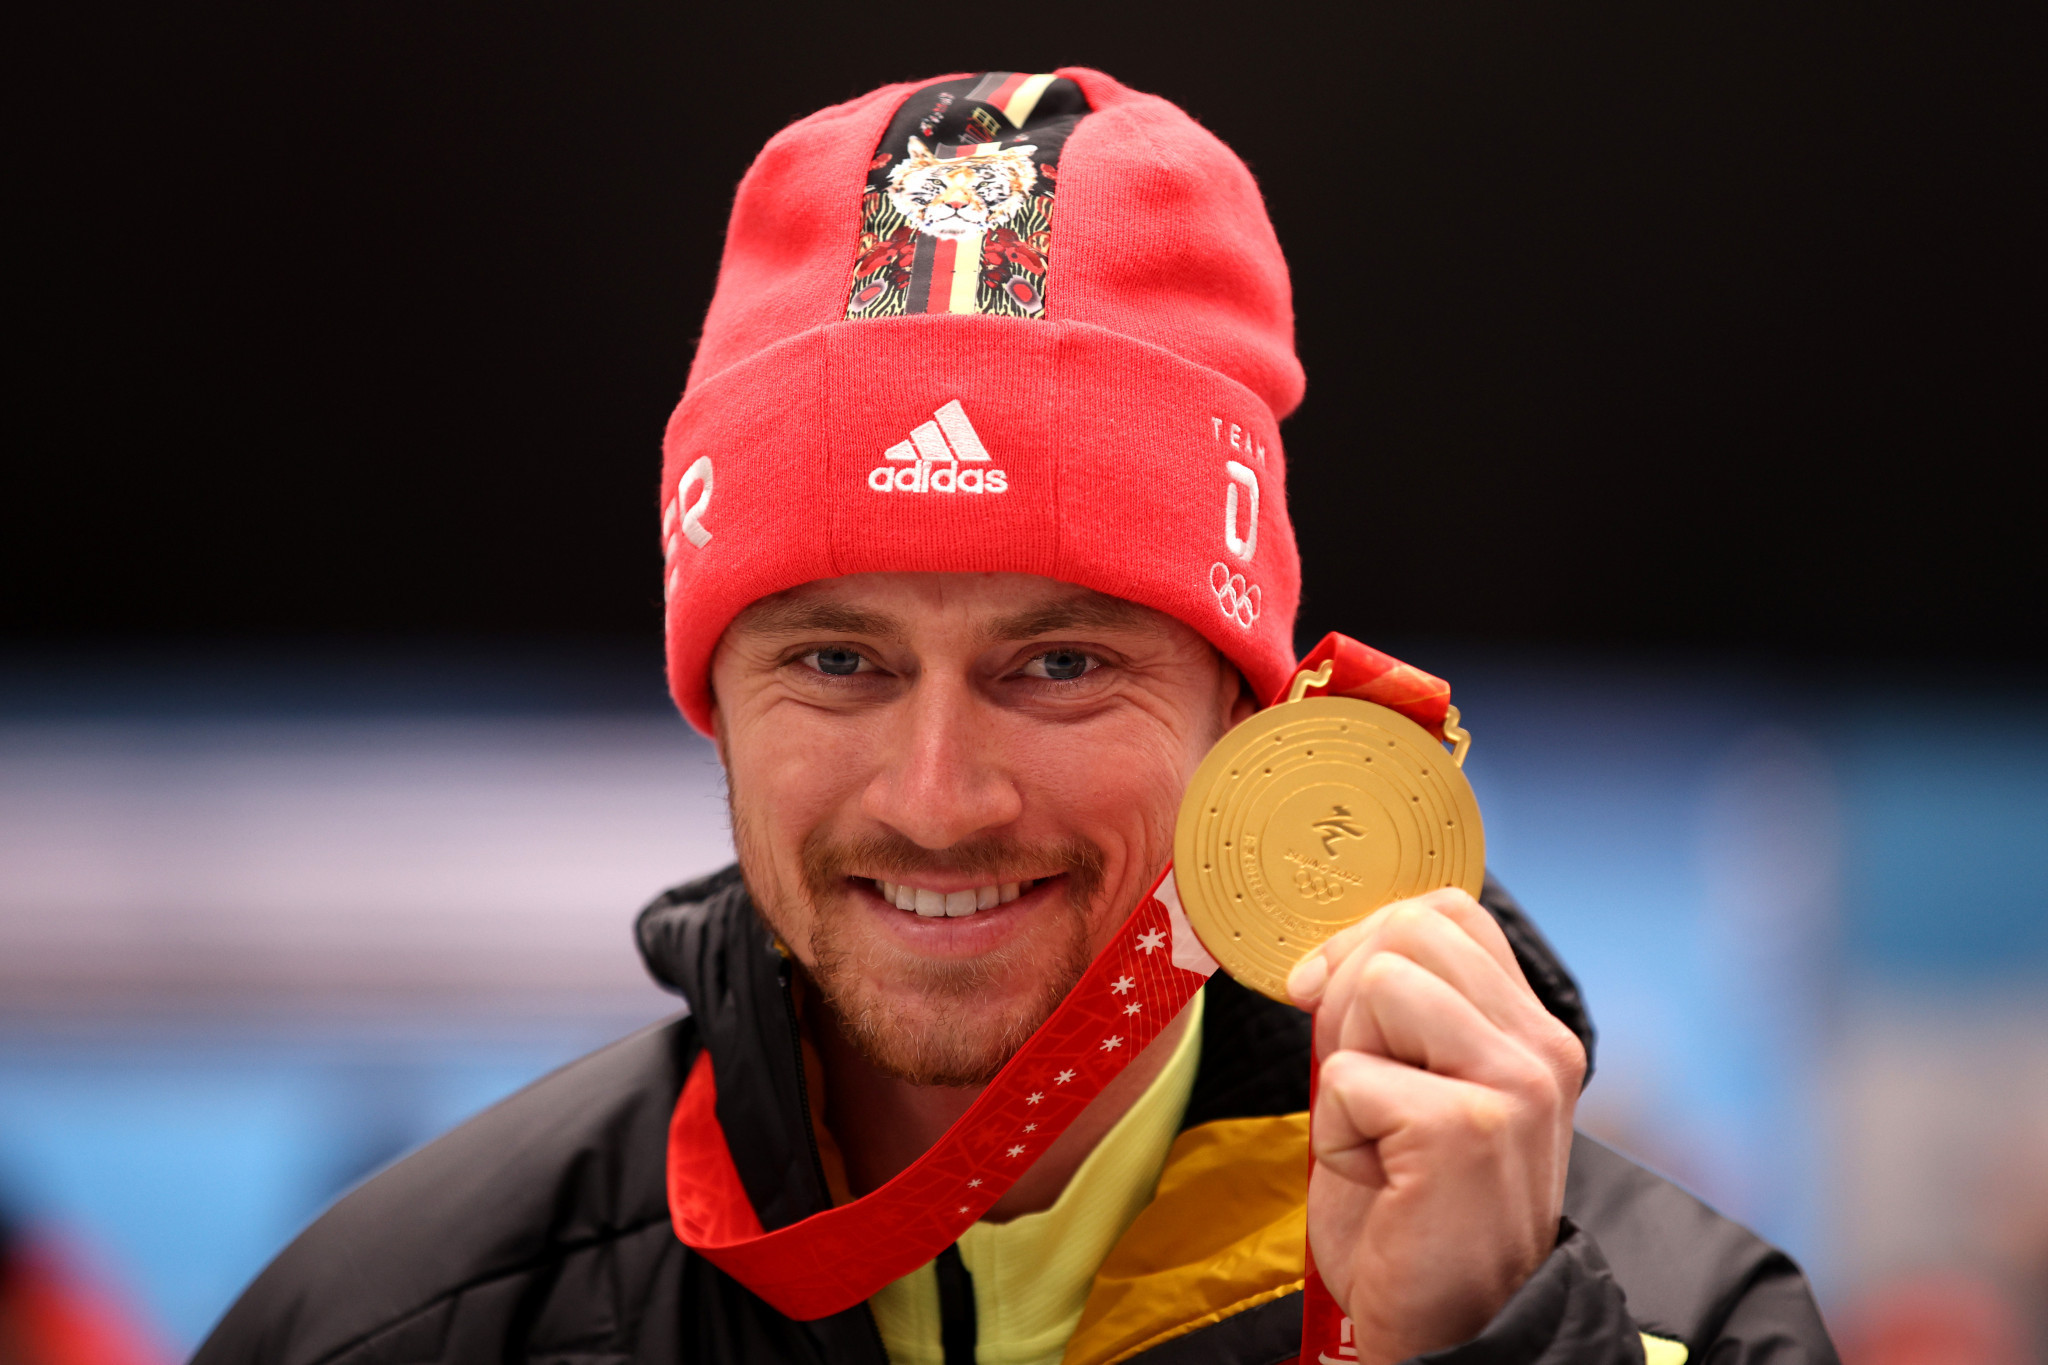 Olympic luge champion Ludwig announces retirement at age of 36